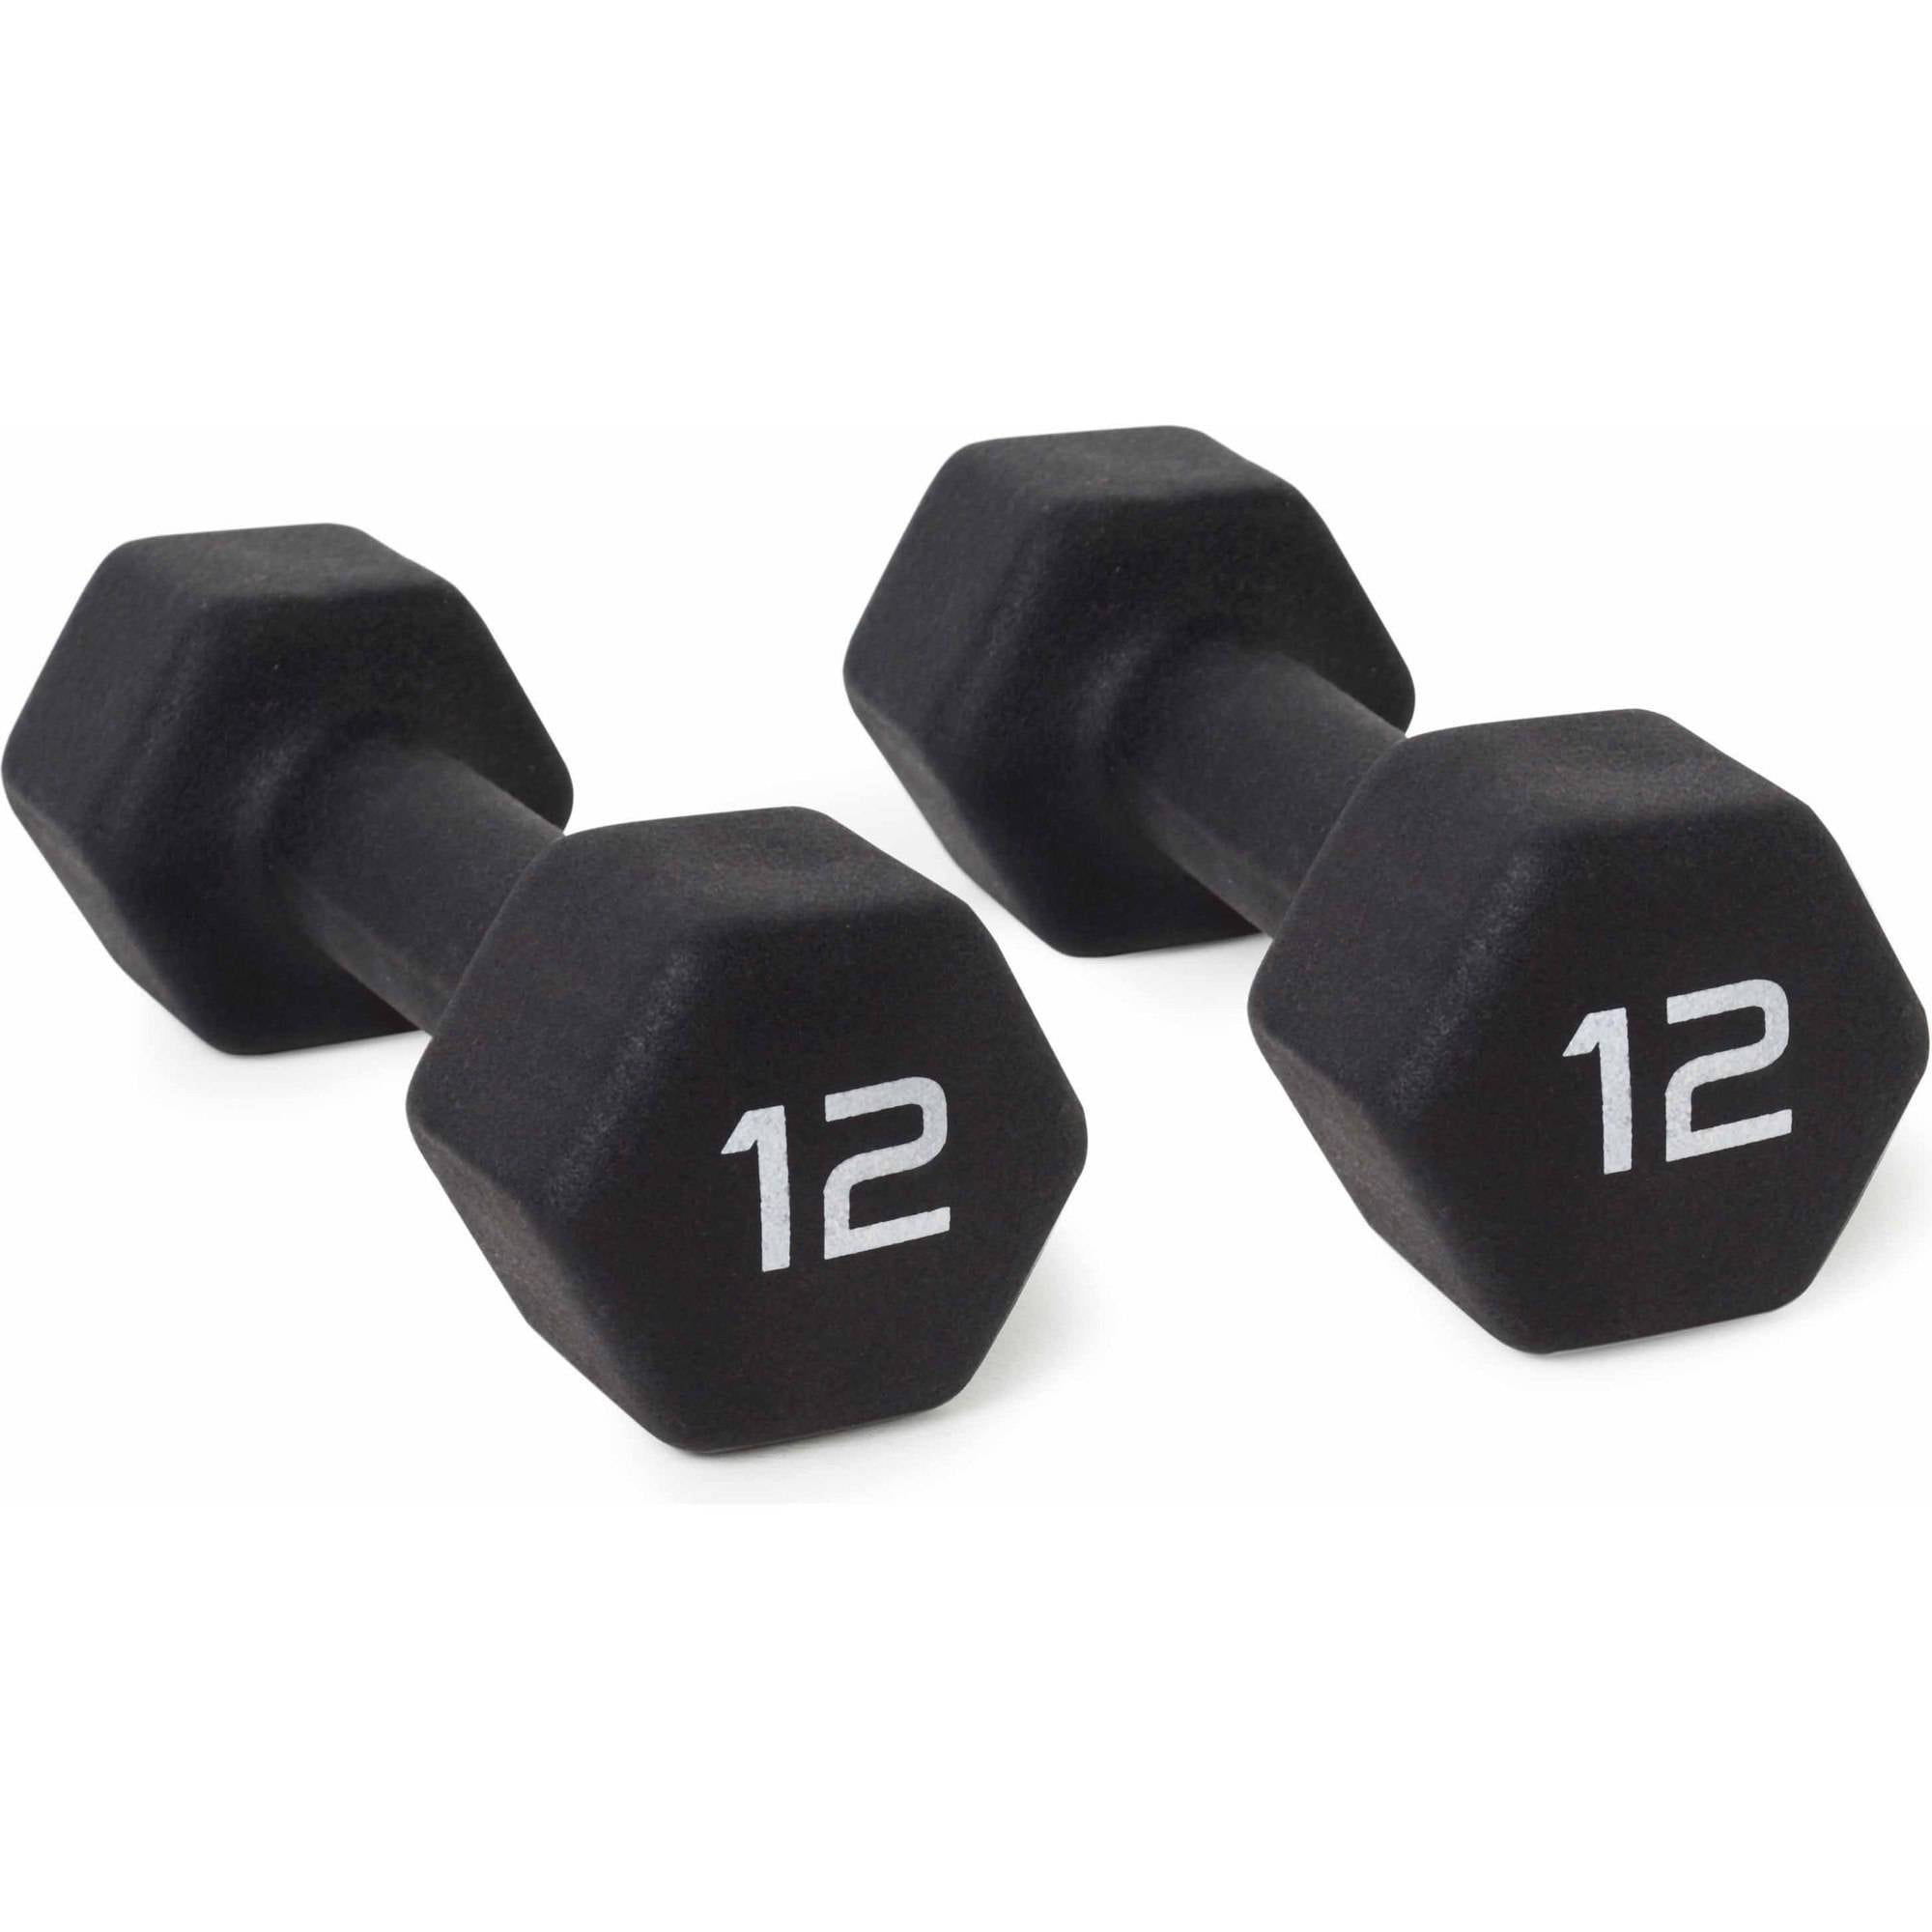 CAP Neoprene Dumbbells 8LB and 10LB Pound Free Weight Pairs Bundle Dumb bell Lot 